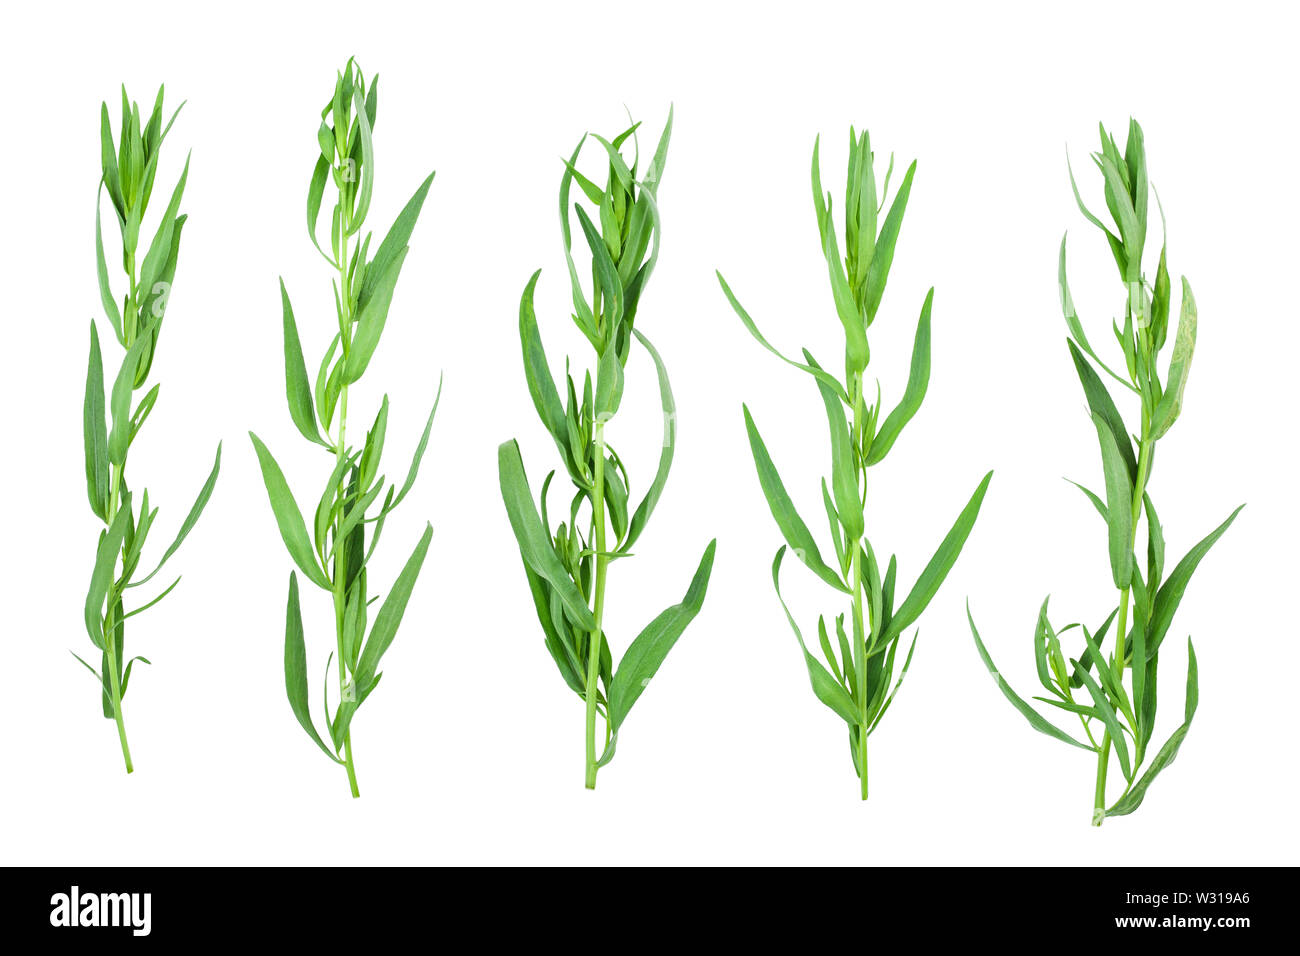 tarragon or estragon isolated on a white background. Artemisia dracunculus. Top view. Flat lay. Stock Photo